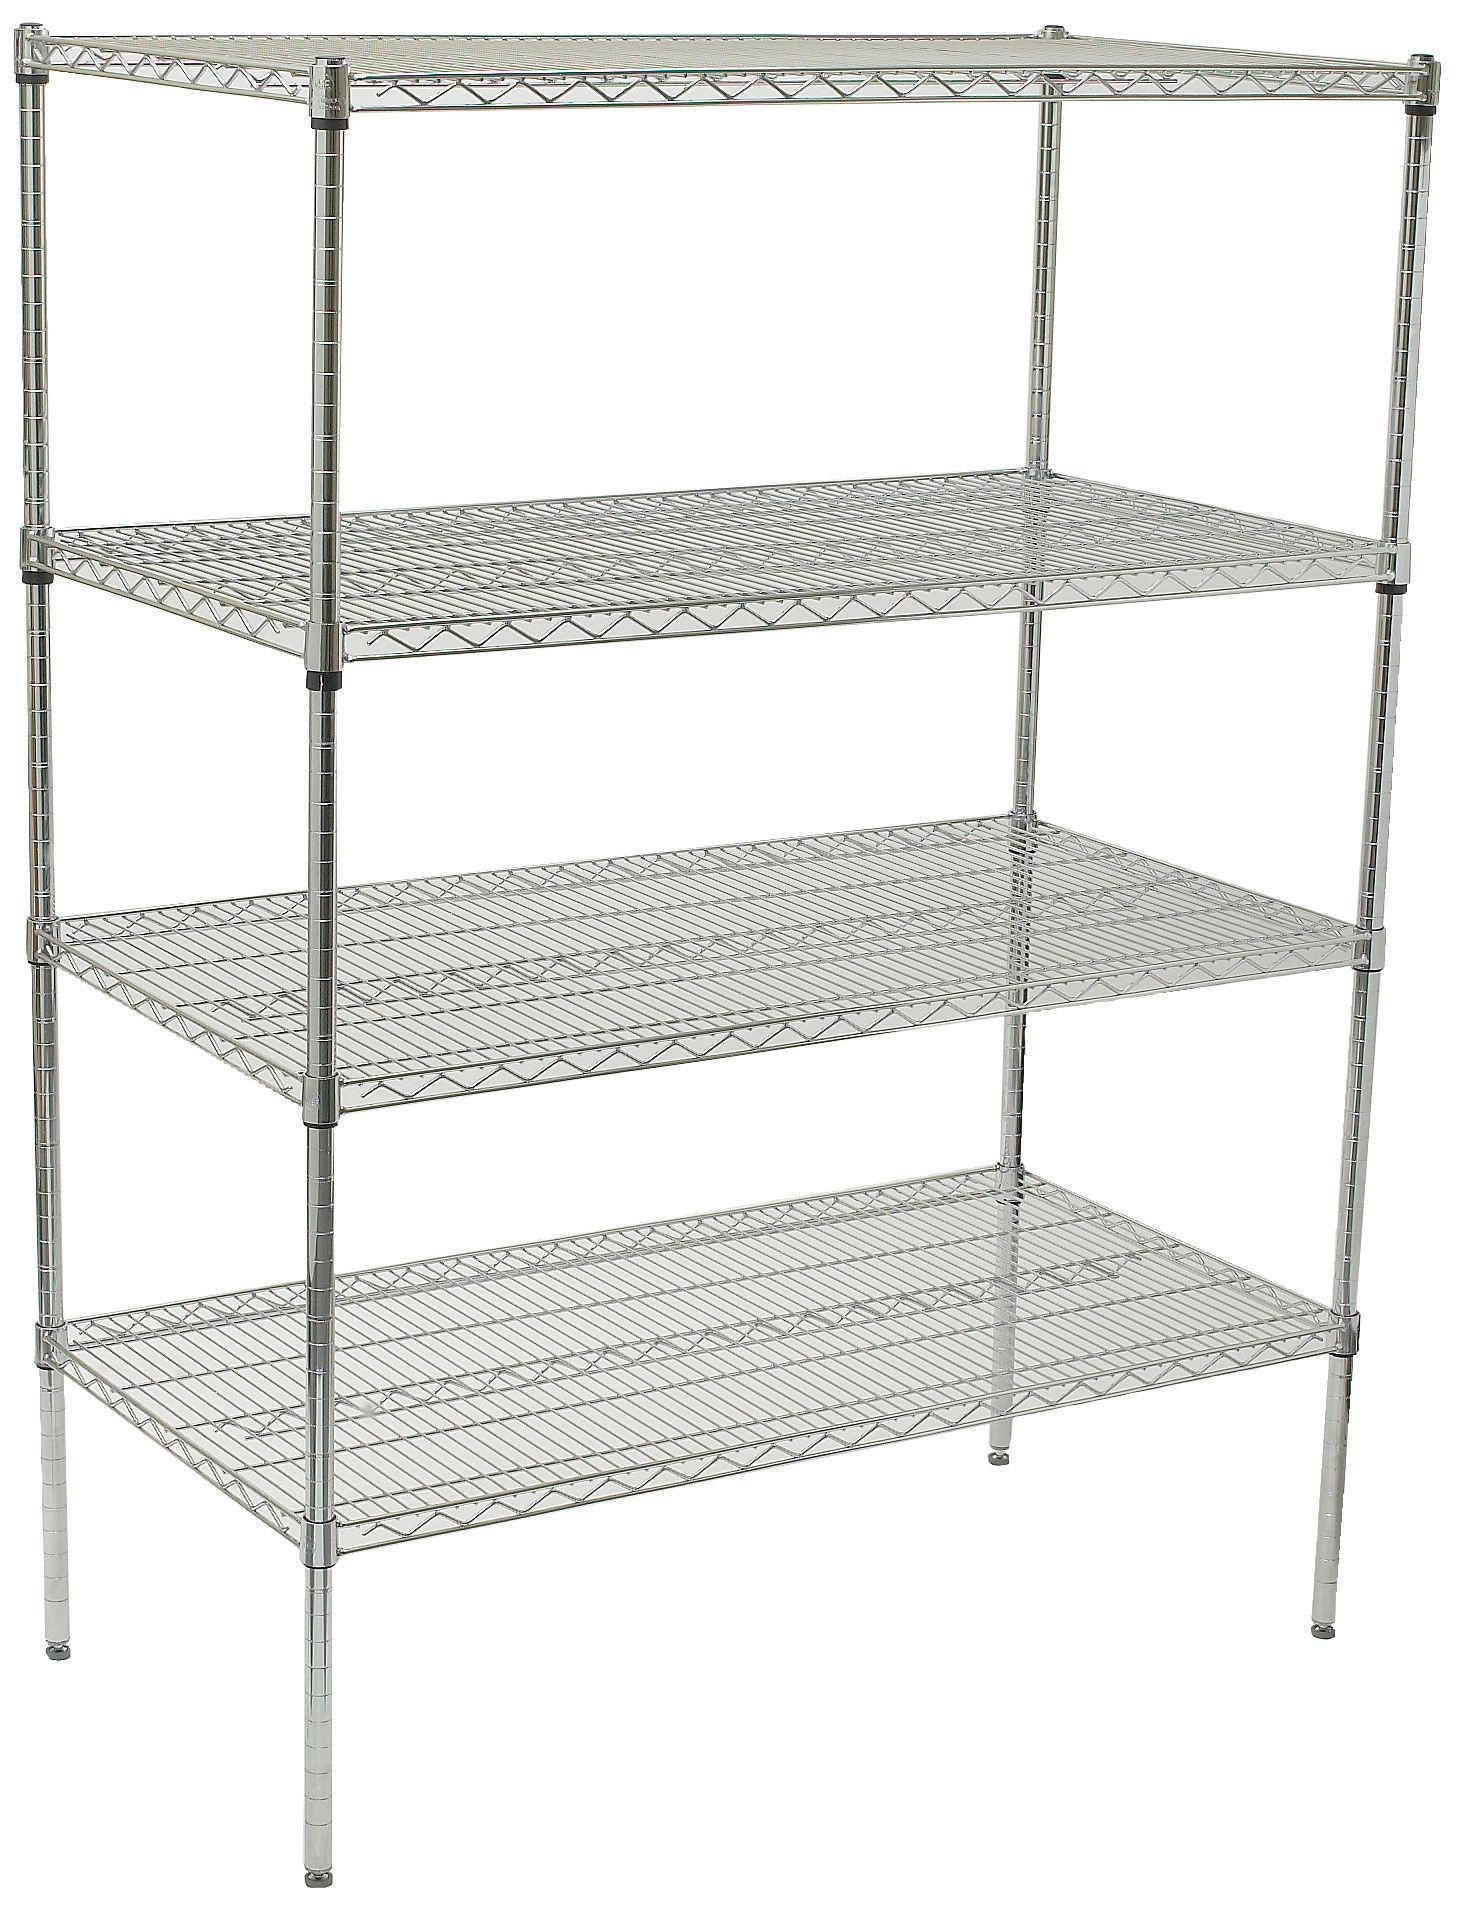 Winco VCS-1836 Chrome Plated 4-Tier Wire Shelving Set, 18" x 36" x 72"